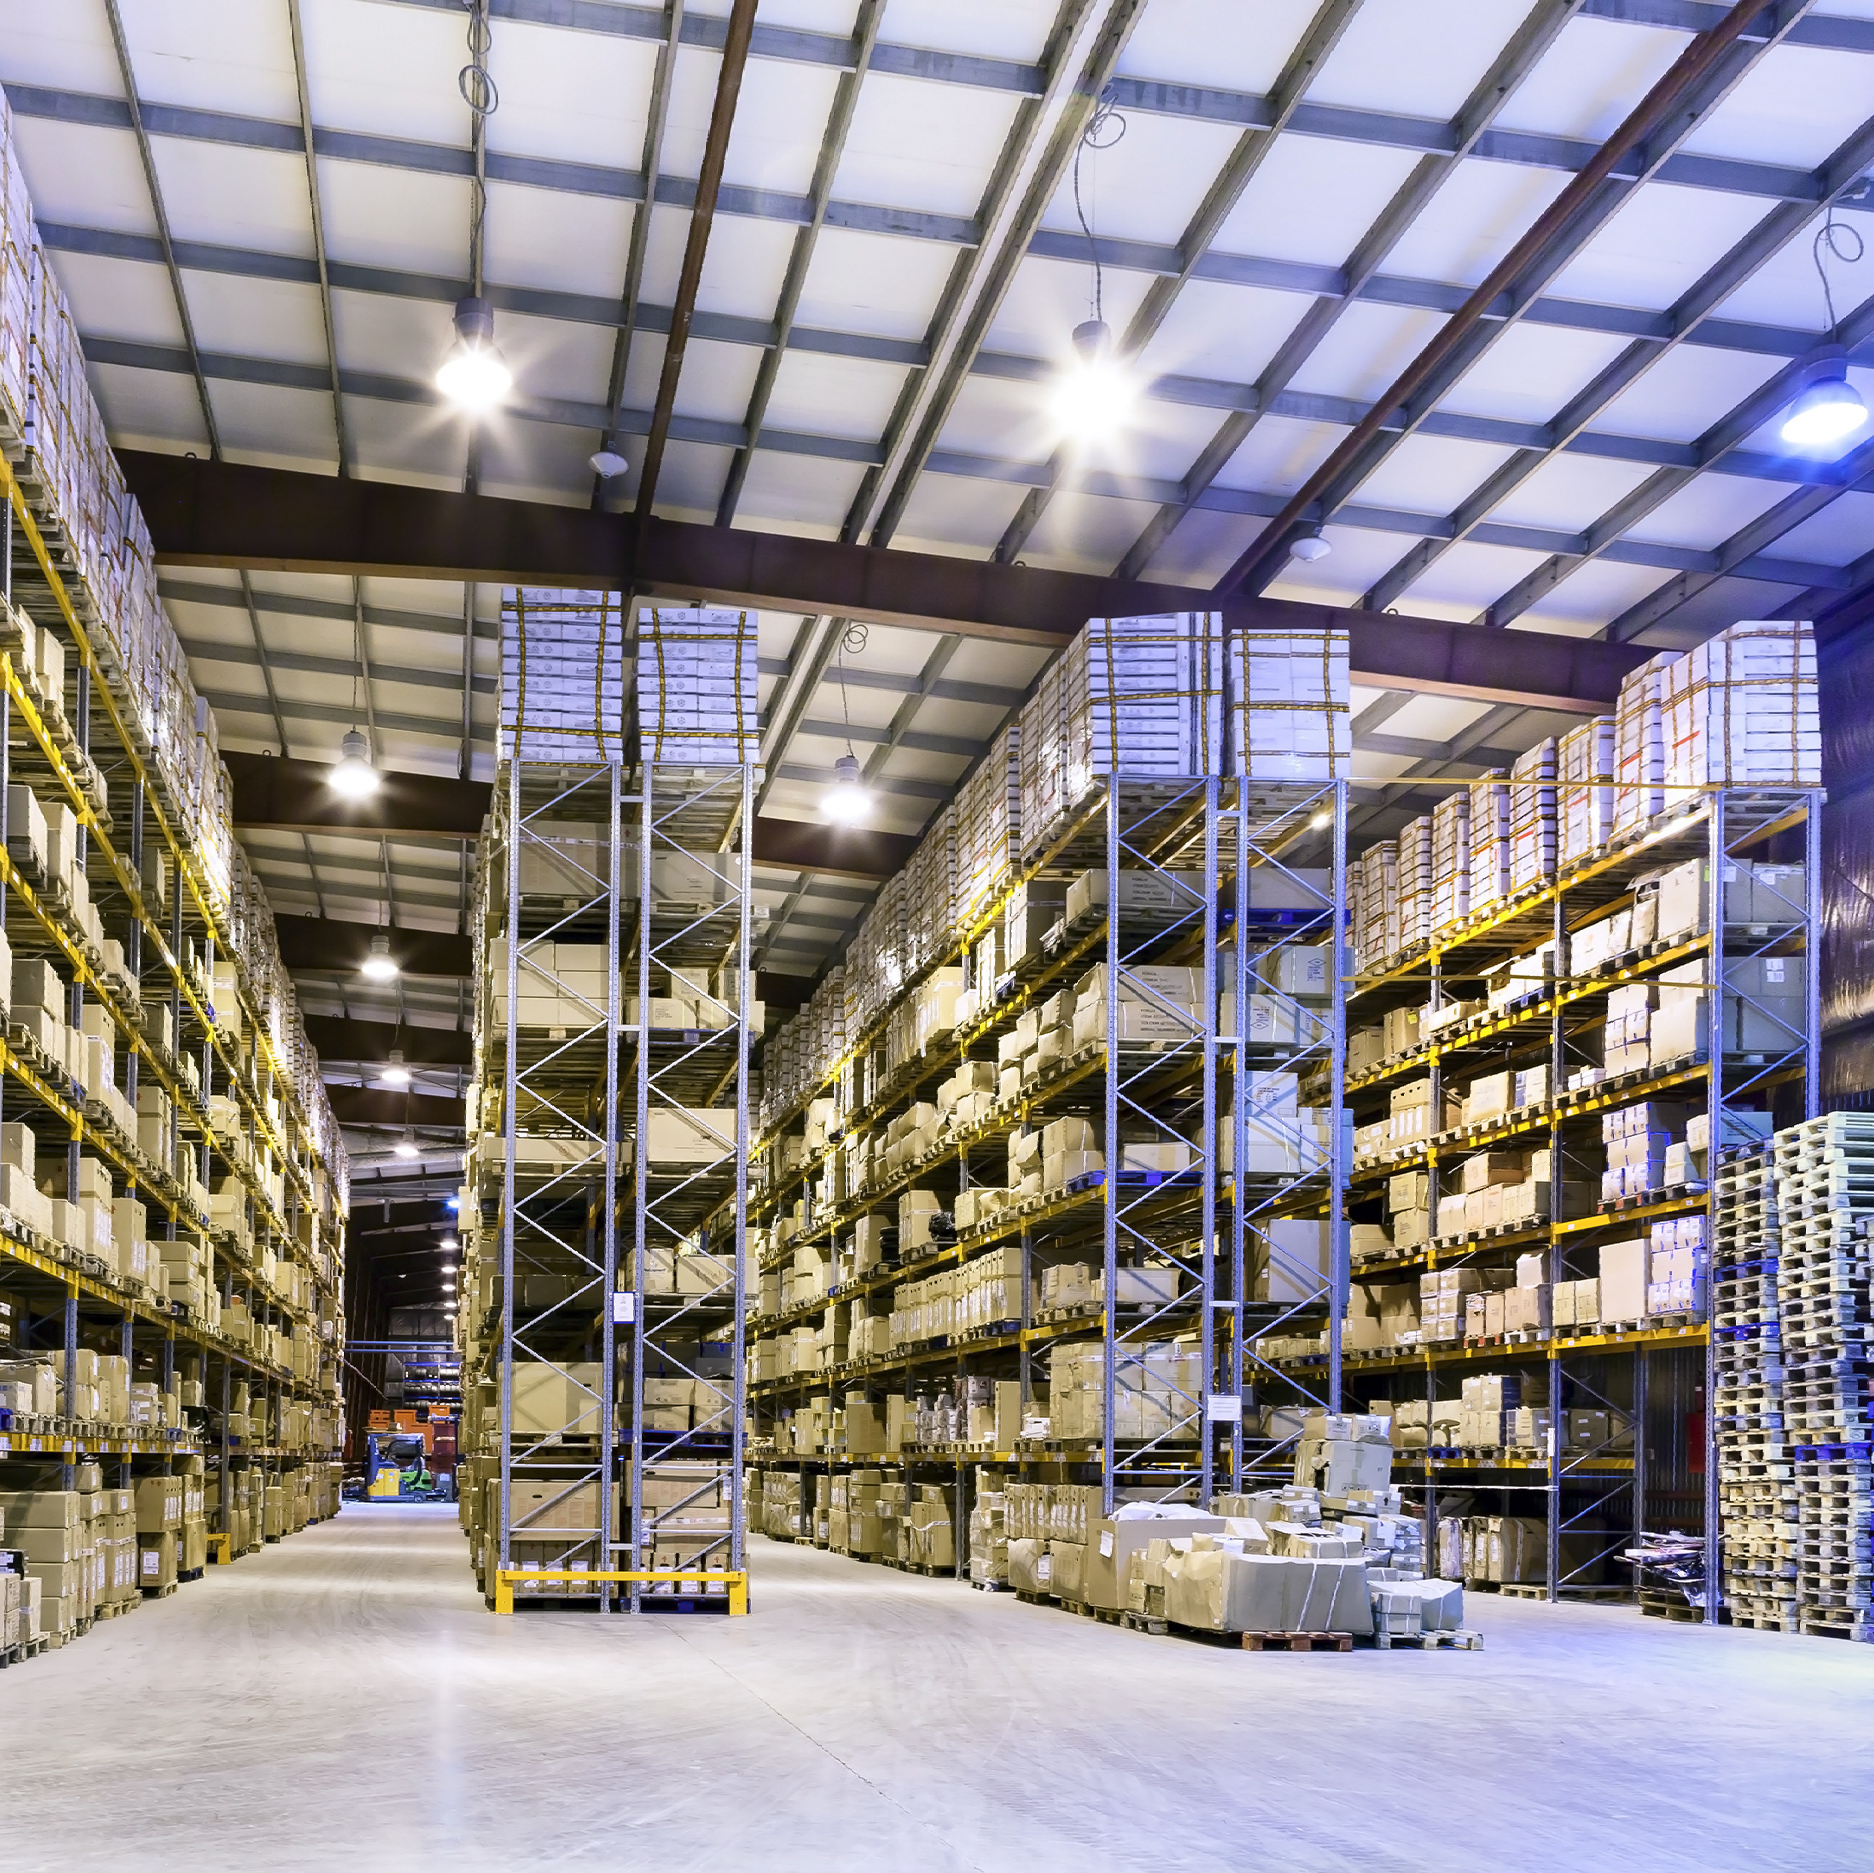 a well-lighted large warehouse filled with lots of shelves and boxes